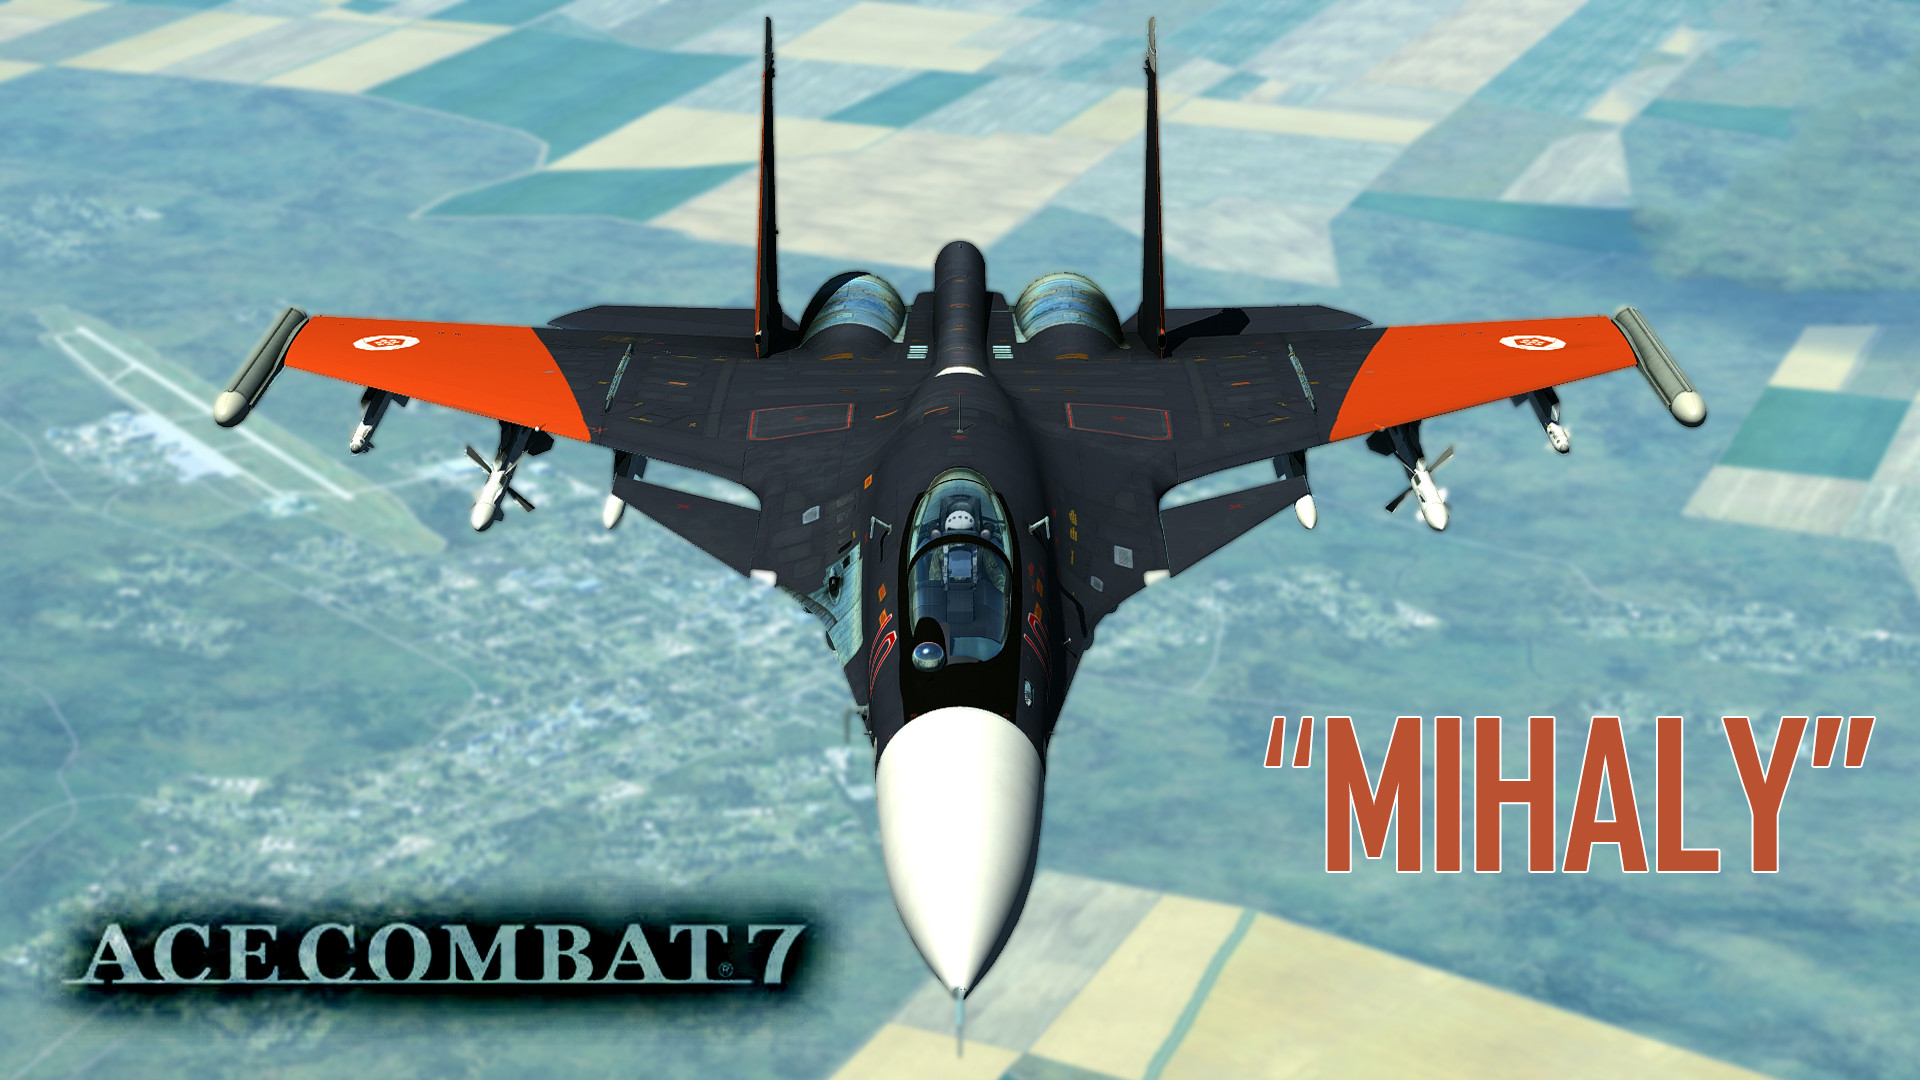 1920x1080 ACE COMBAT 7 Wallpaper by BillyM12345 ACE COMBAT 7 Wallpaper by BillyM12345